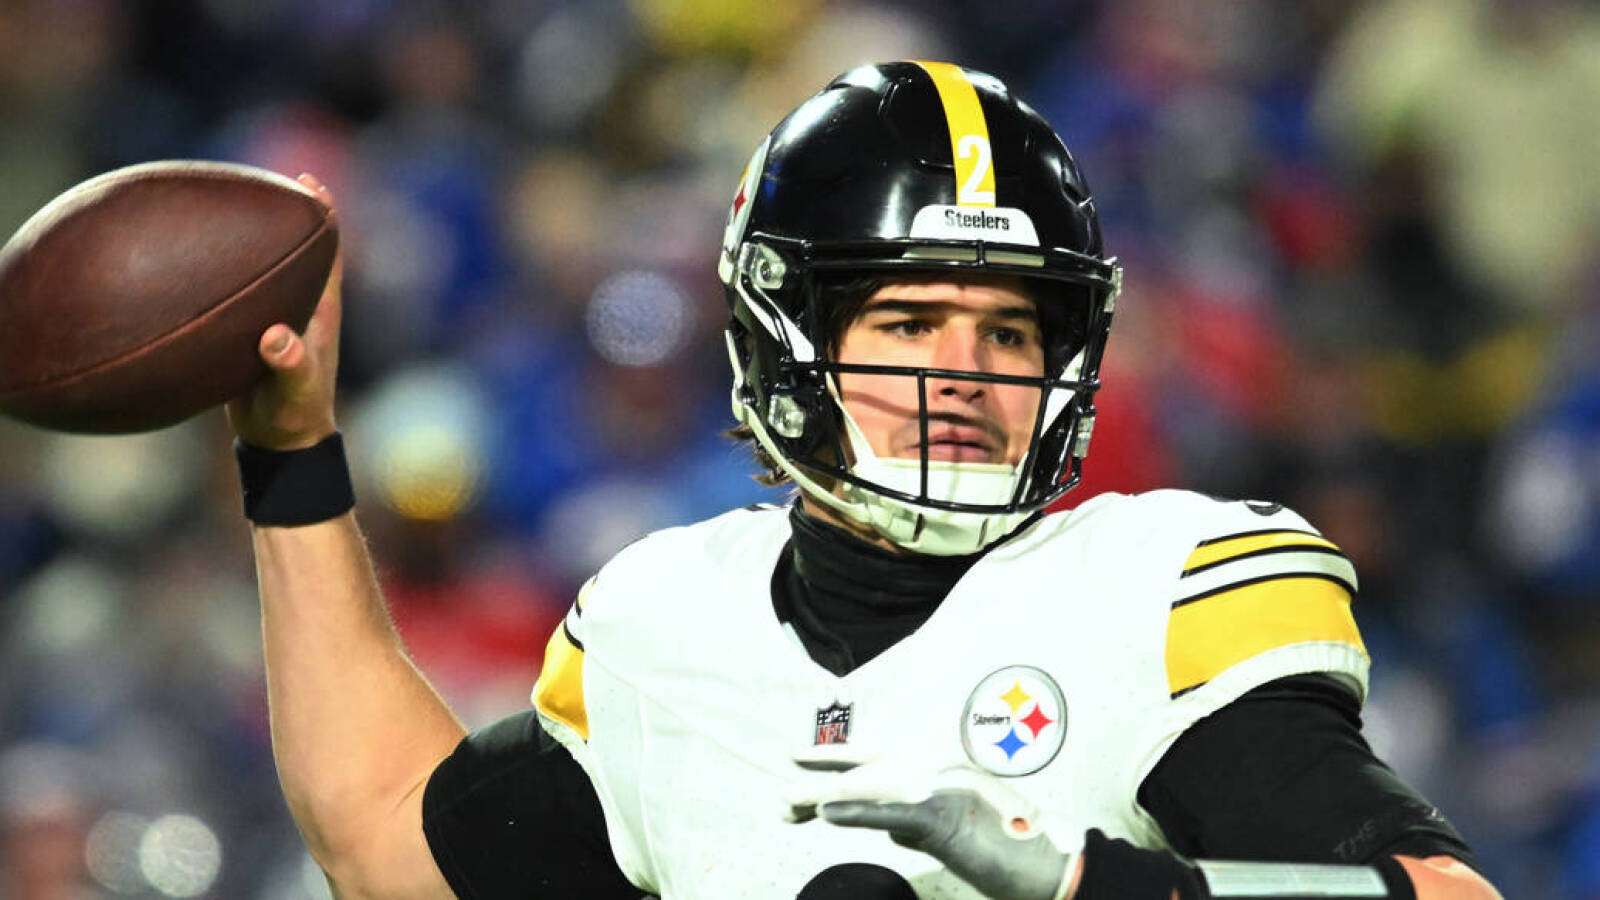 Analyst believes Steelers are making 'colossal misjudgment'